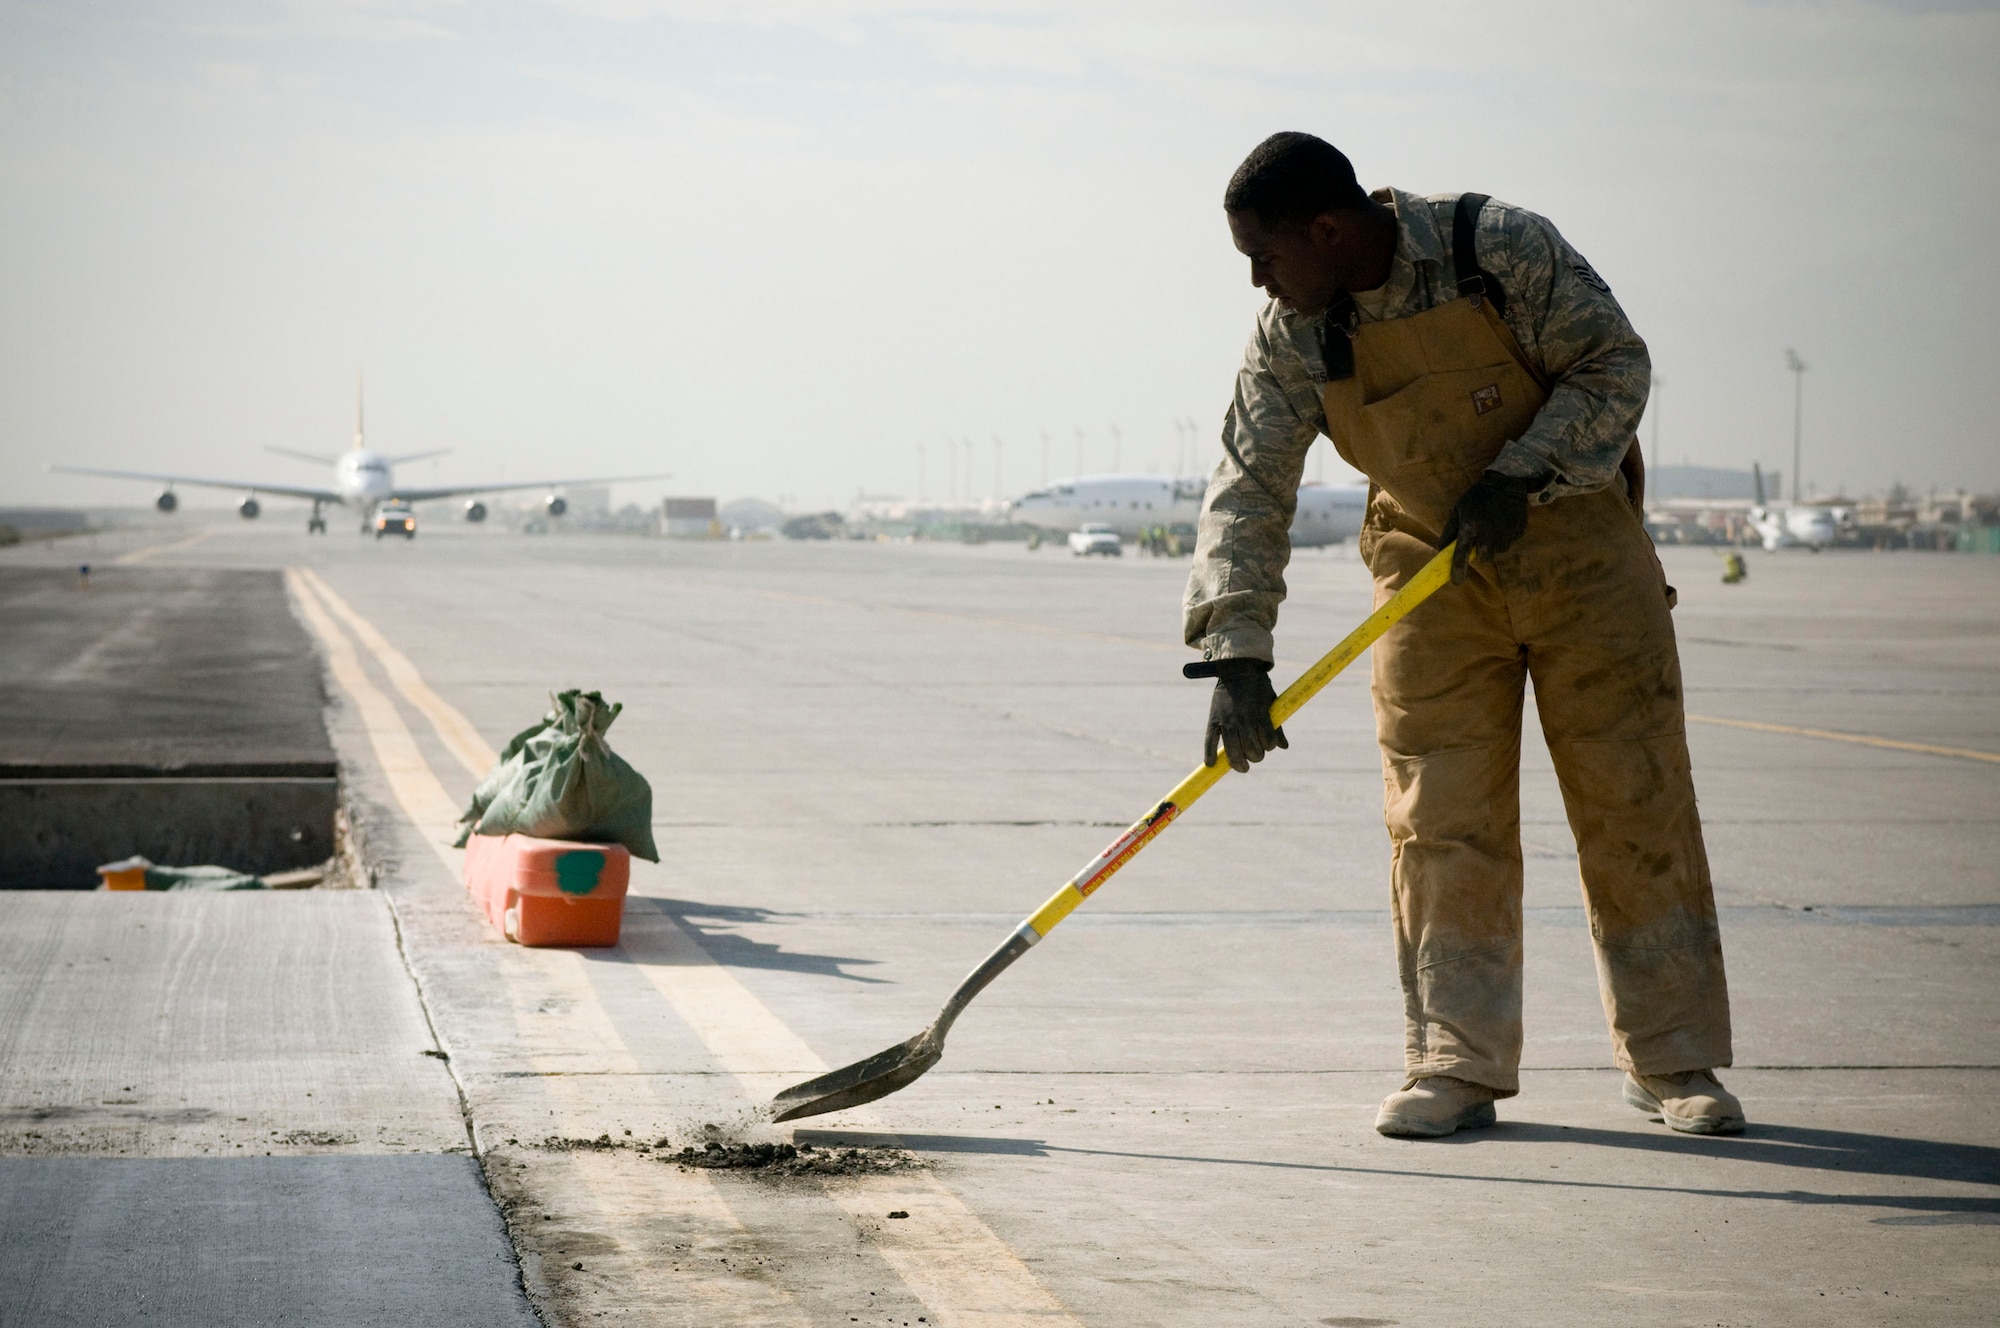 Staff Sgt. Shelton Jamison, 455th Expeditionary Civil Engineer Squadron, scoops away excess concrete on Thanksgiving Day, Nov. 27., at Bagram Air Field, Afghanistan. The Airmen of the 455th ECES must work quickly and efficiently to avoid causing traffic problems on the busy taxiway. Sgt. Jamison is deployed from Barksdale Air Force Base, La. (U.S. Air Force photo by Staff Sgt. Samuel Morse)(Released)